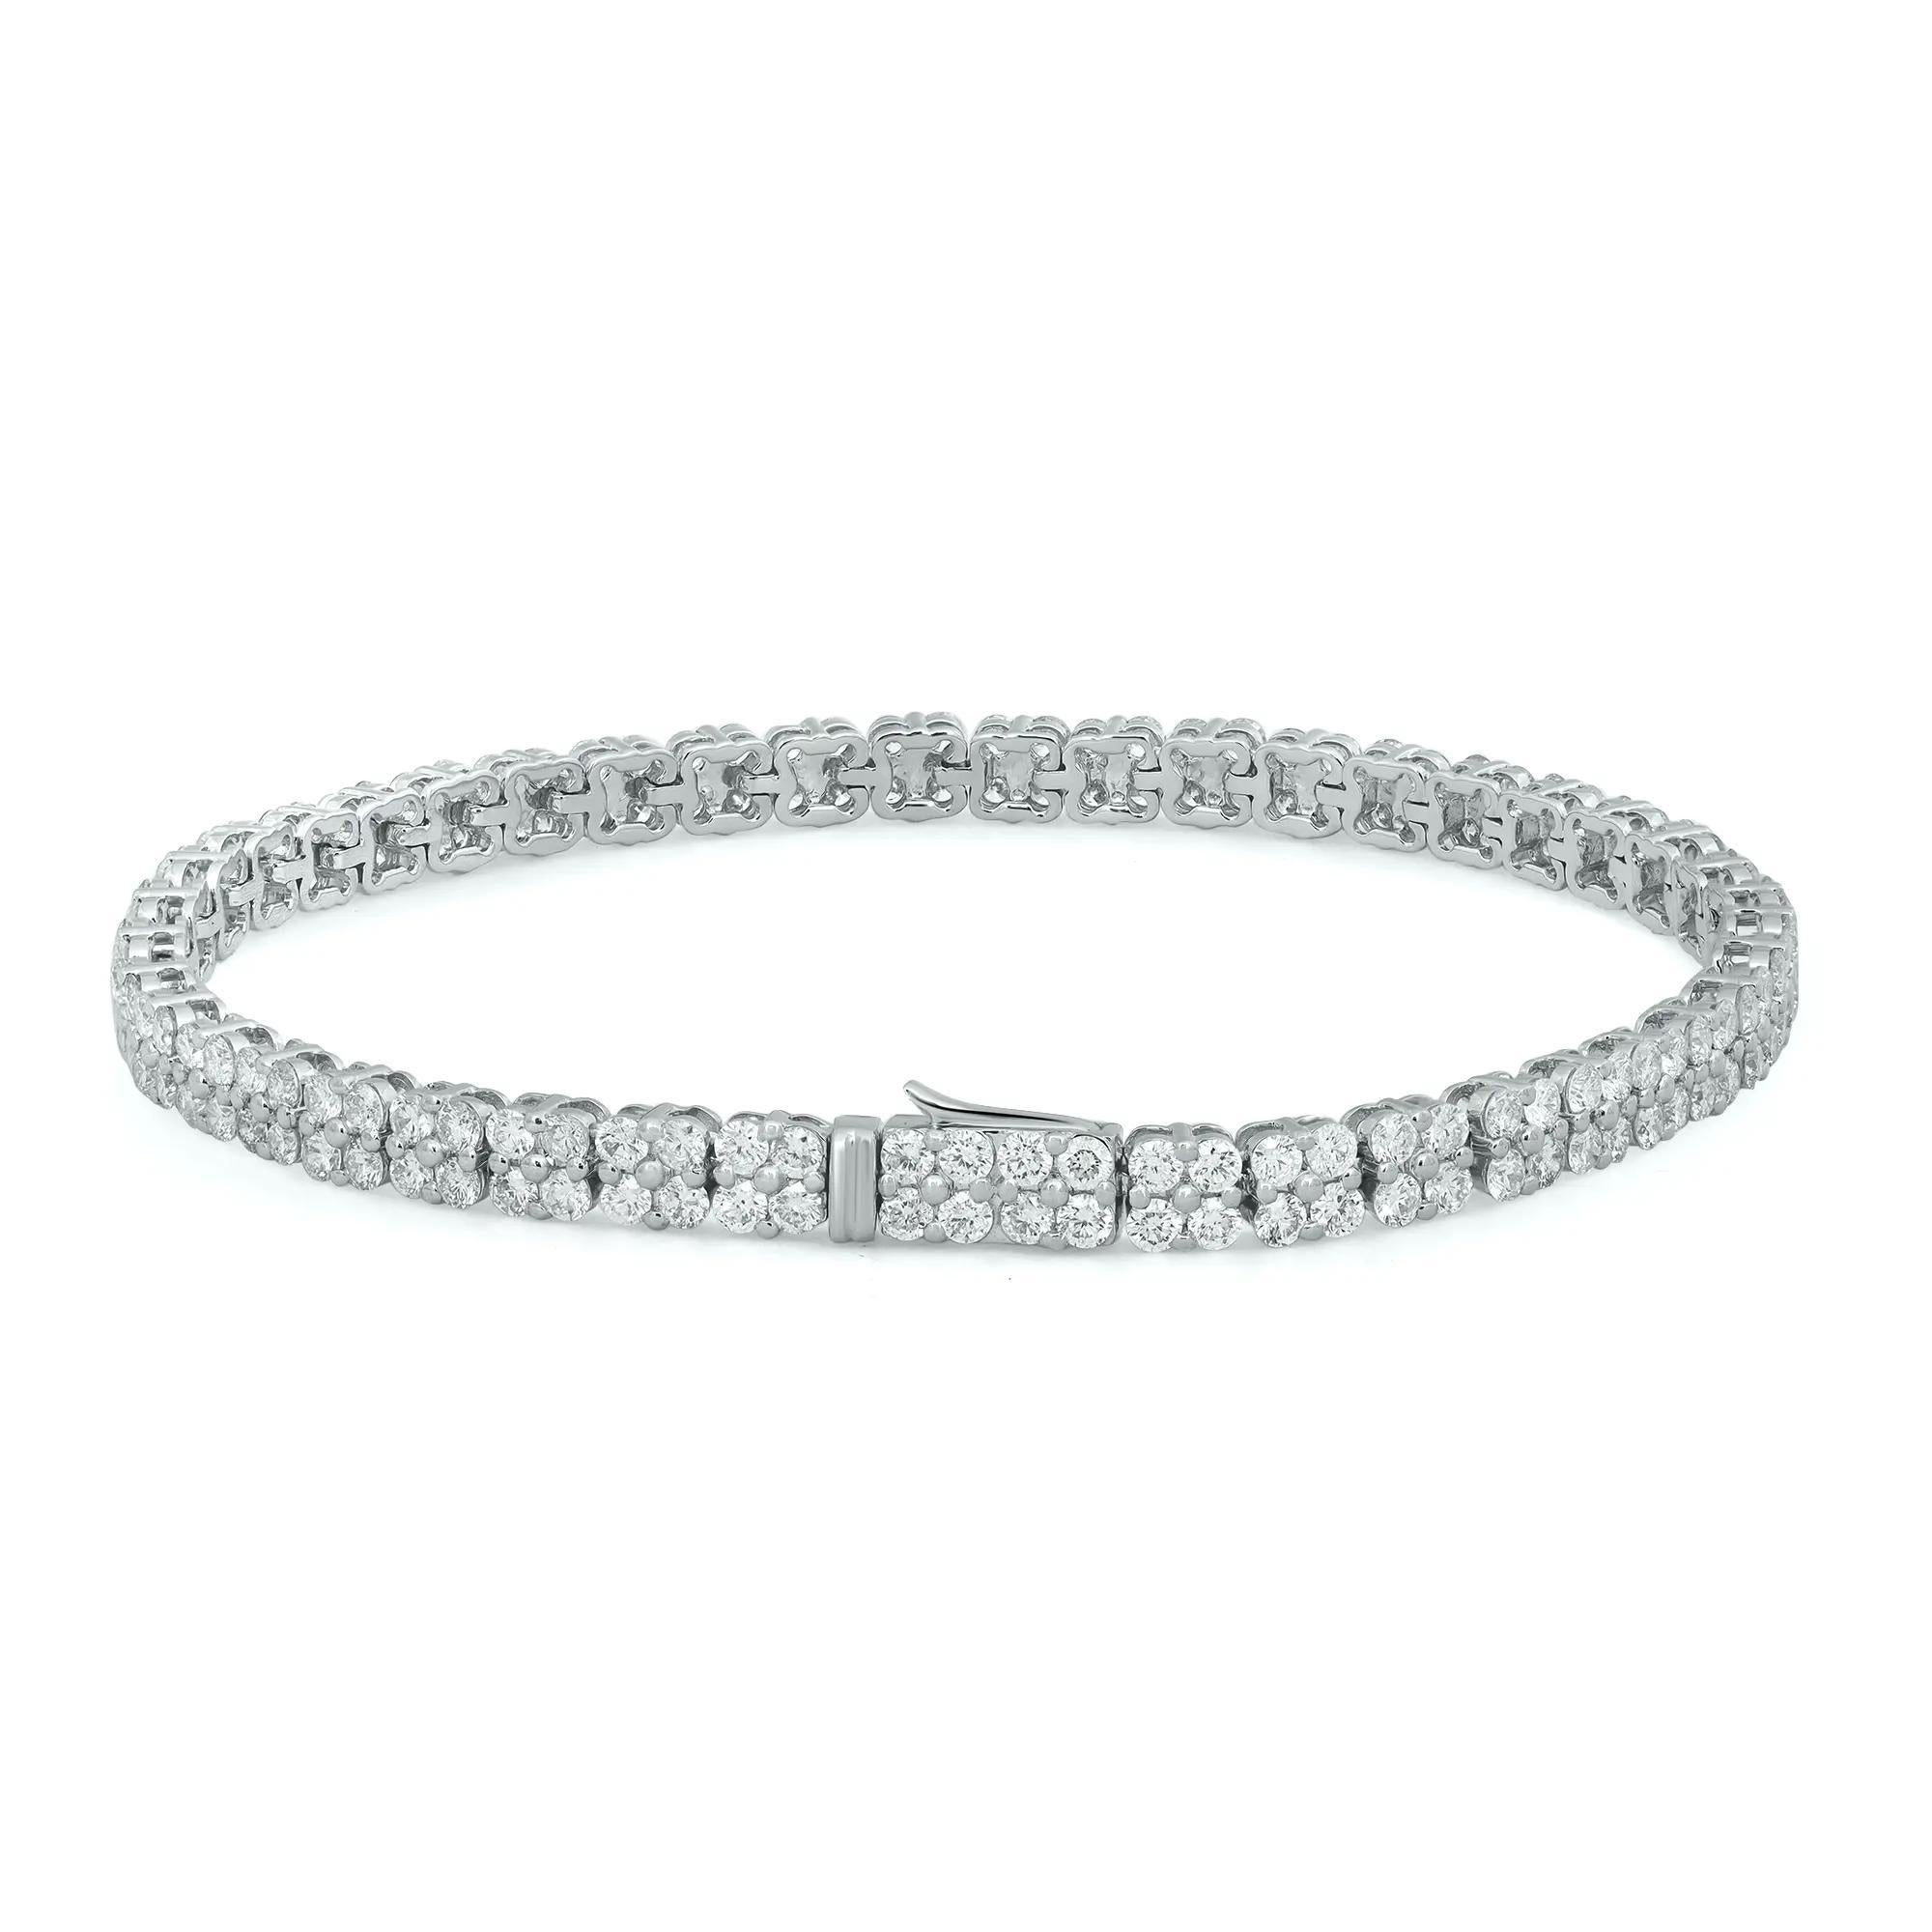 Introducing our 4.61 Carat Diamond Two-Row Bracelet in elegant 18K white gold—a timeless testament to sophistication. With a total diamond weight of 4.61 carats, the carefully selected diamonds exhibit exceptional cut, color, clarity, and carat